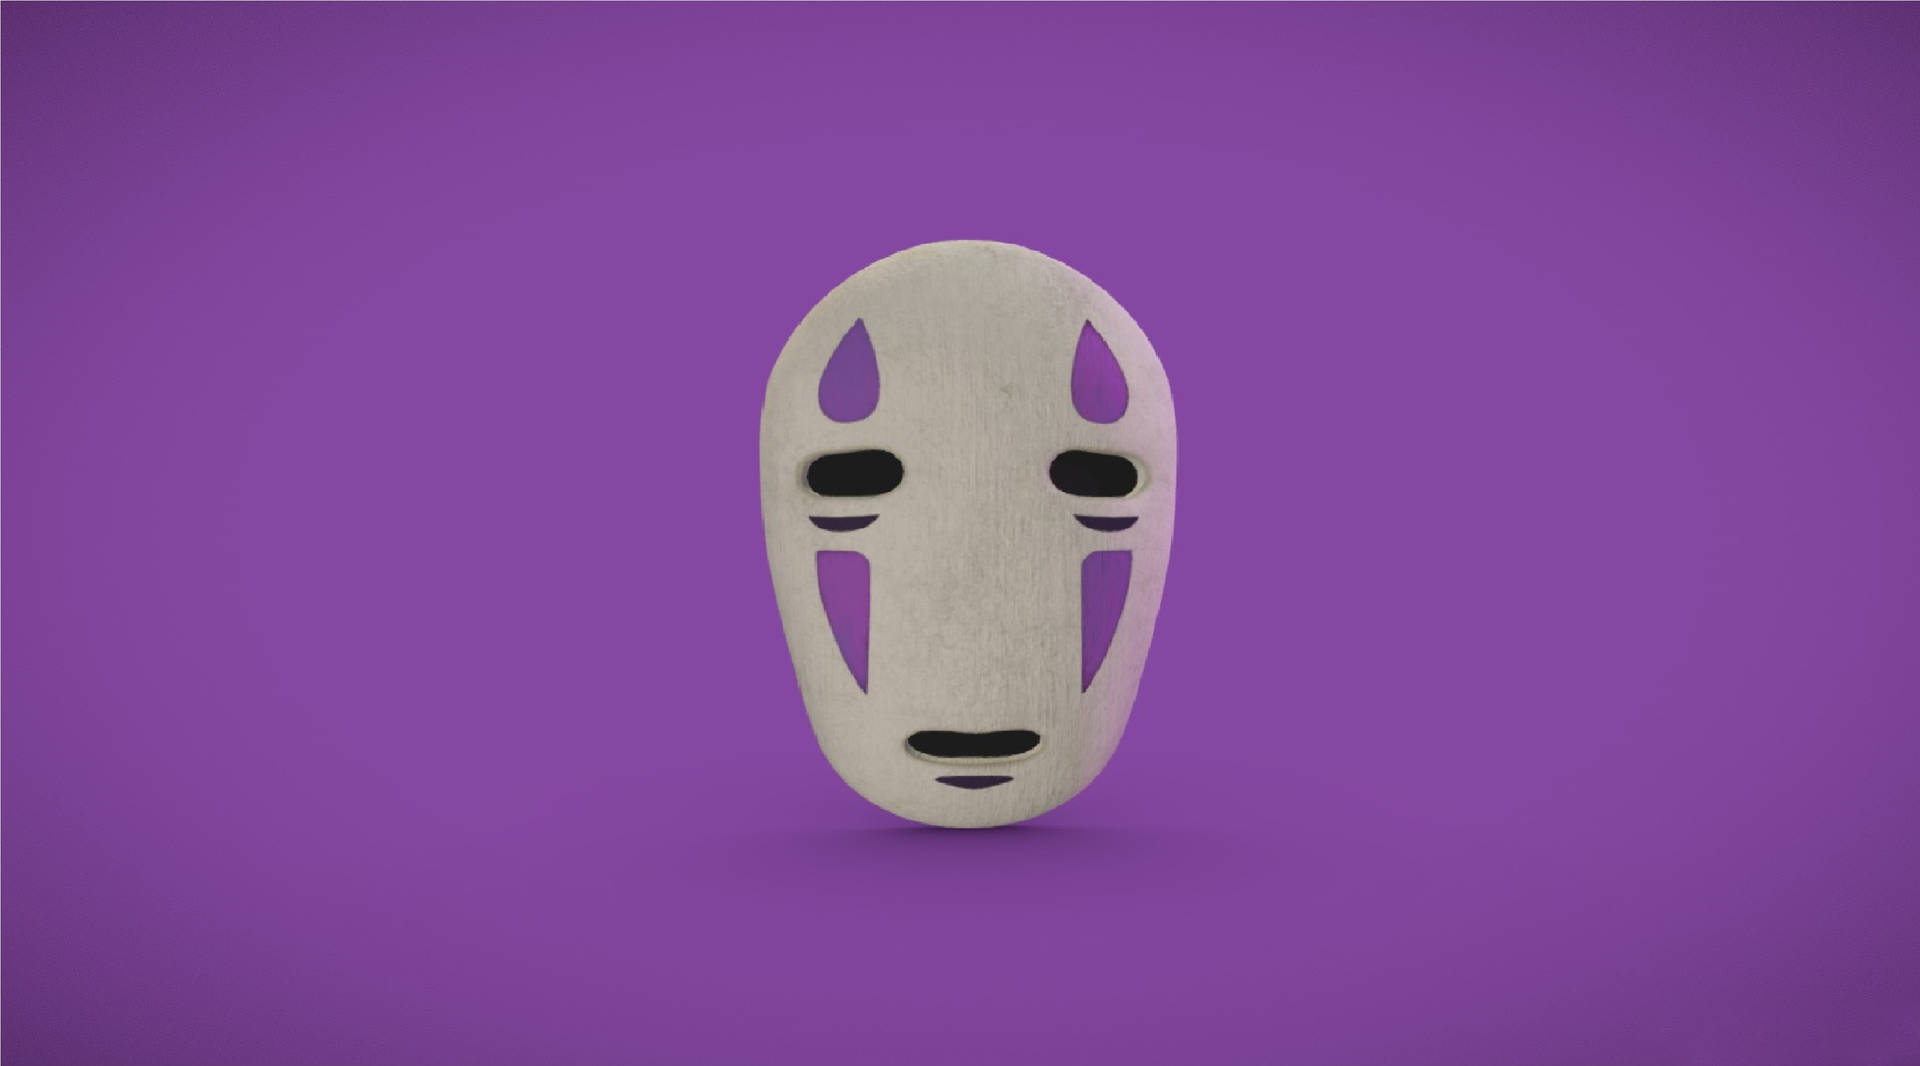 Enigmatic No Face on a Violet Background Wallpaper